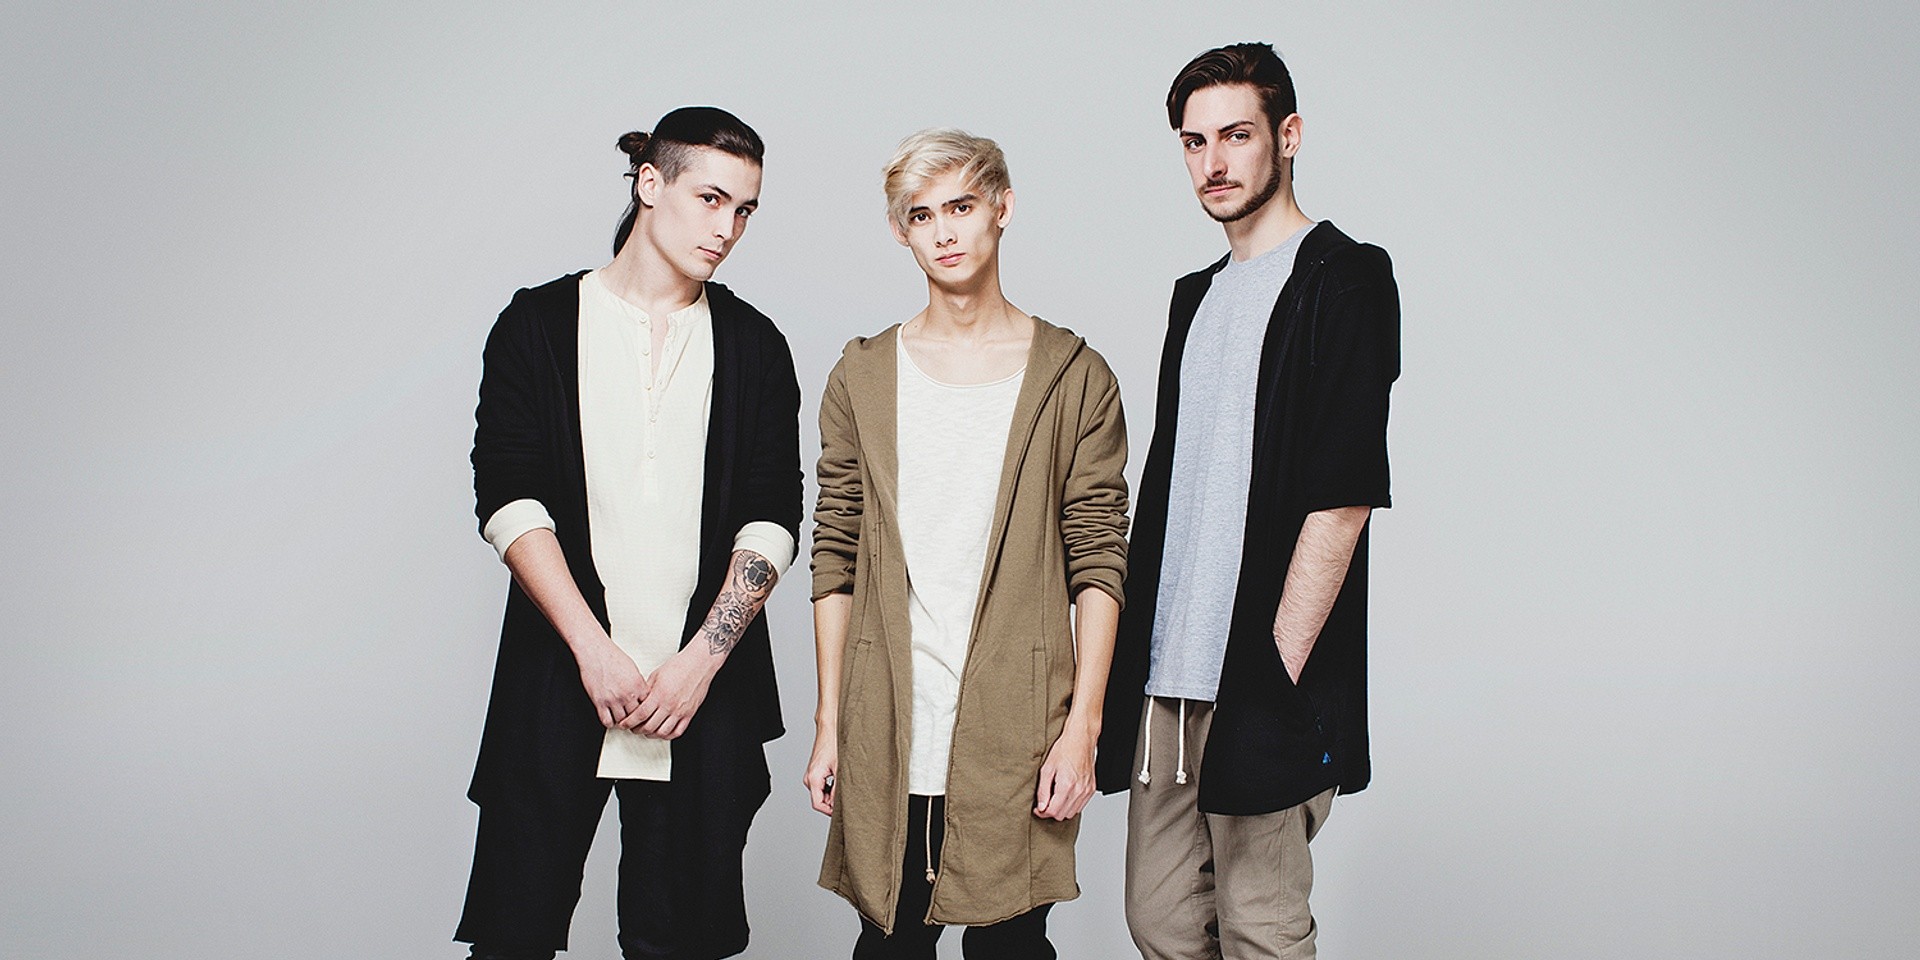 Polyphia will show you how to make your guitar sing